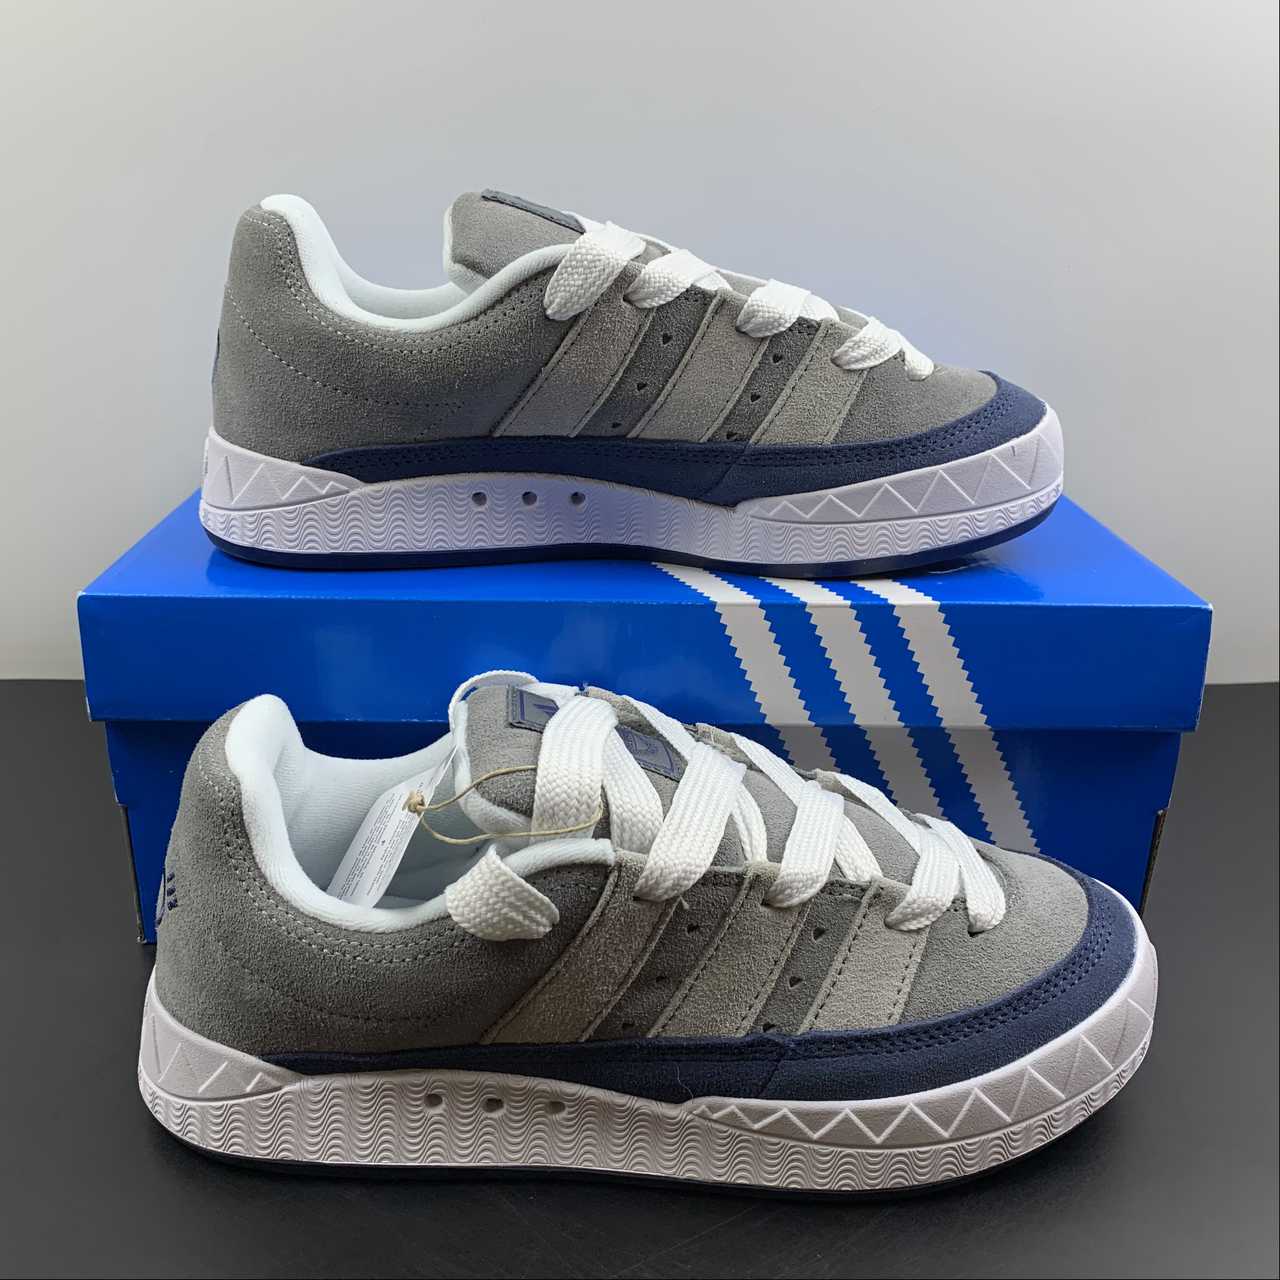 adidas malaysia online shop india products